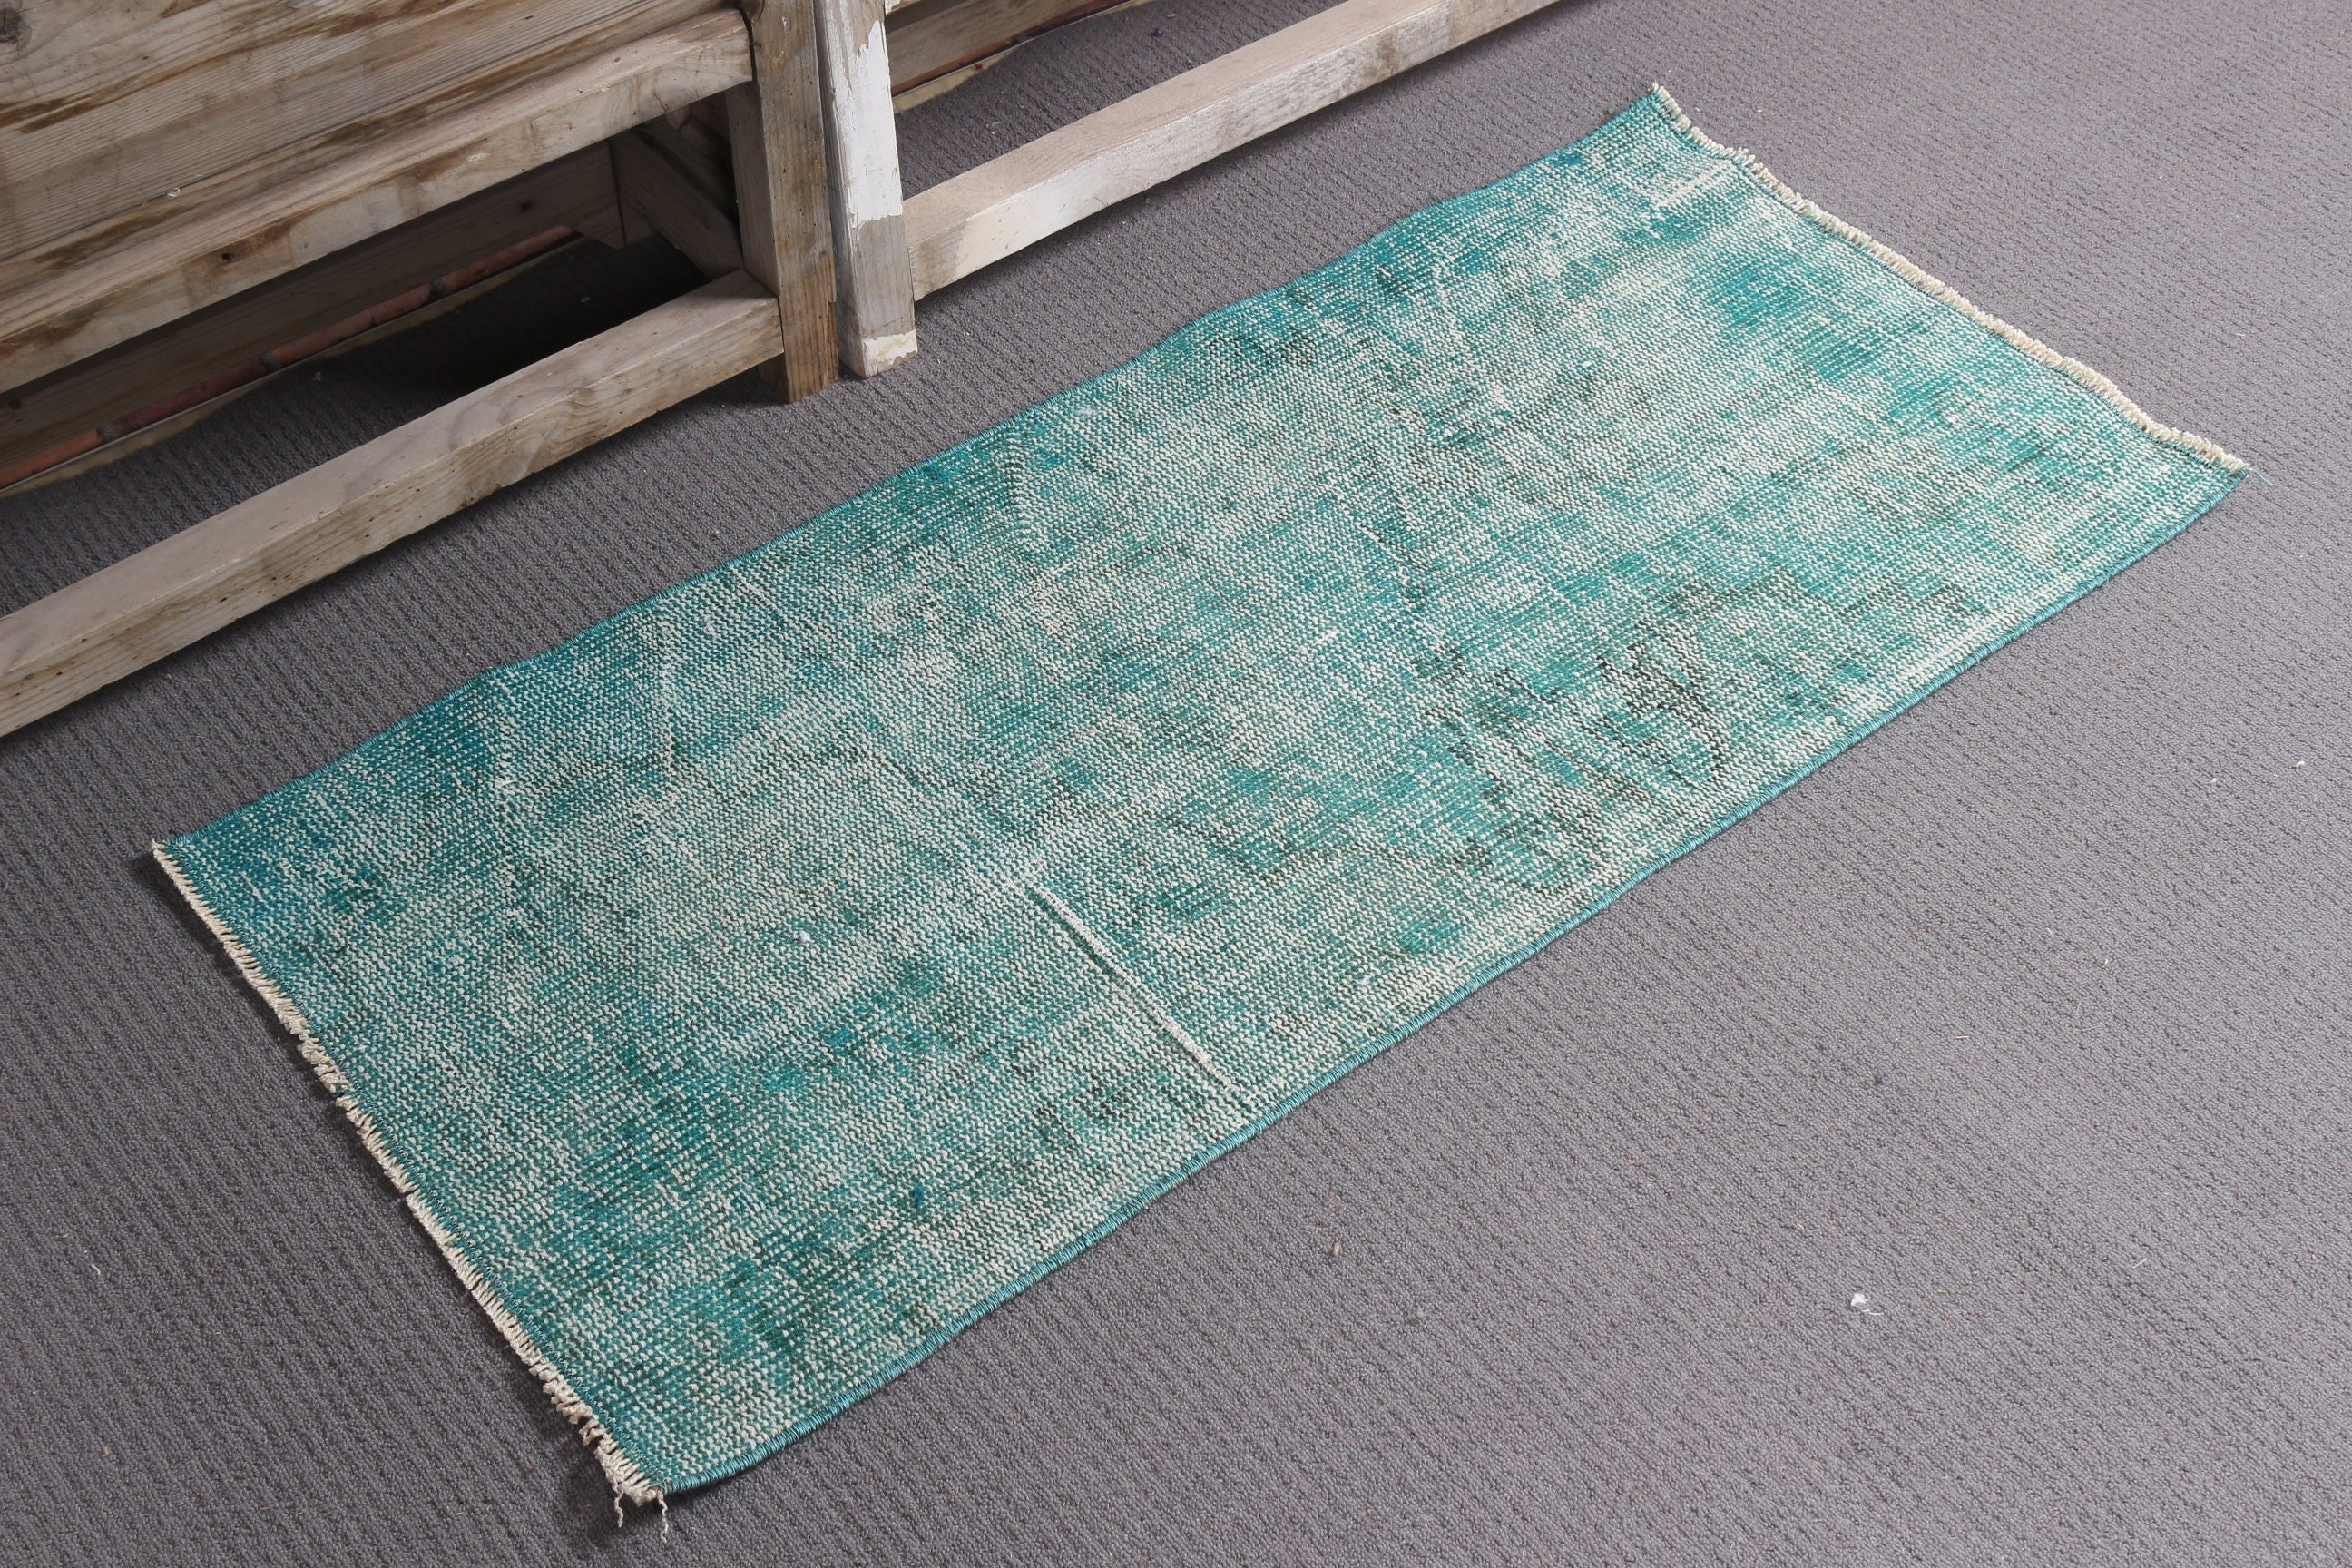 Turkish Rugs, Rugs for Entry, Vintage Rug, Antique Rug, Kitchen Rug, Green  1.8x3.8 ft Small Rug, Entry Rug, Wool Rug